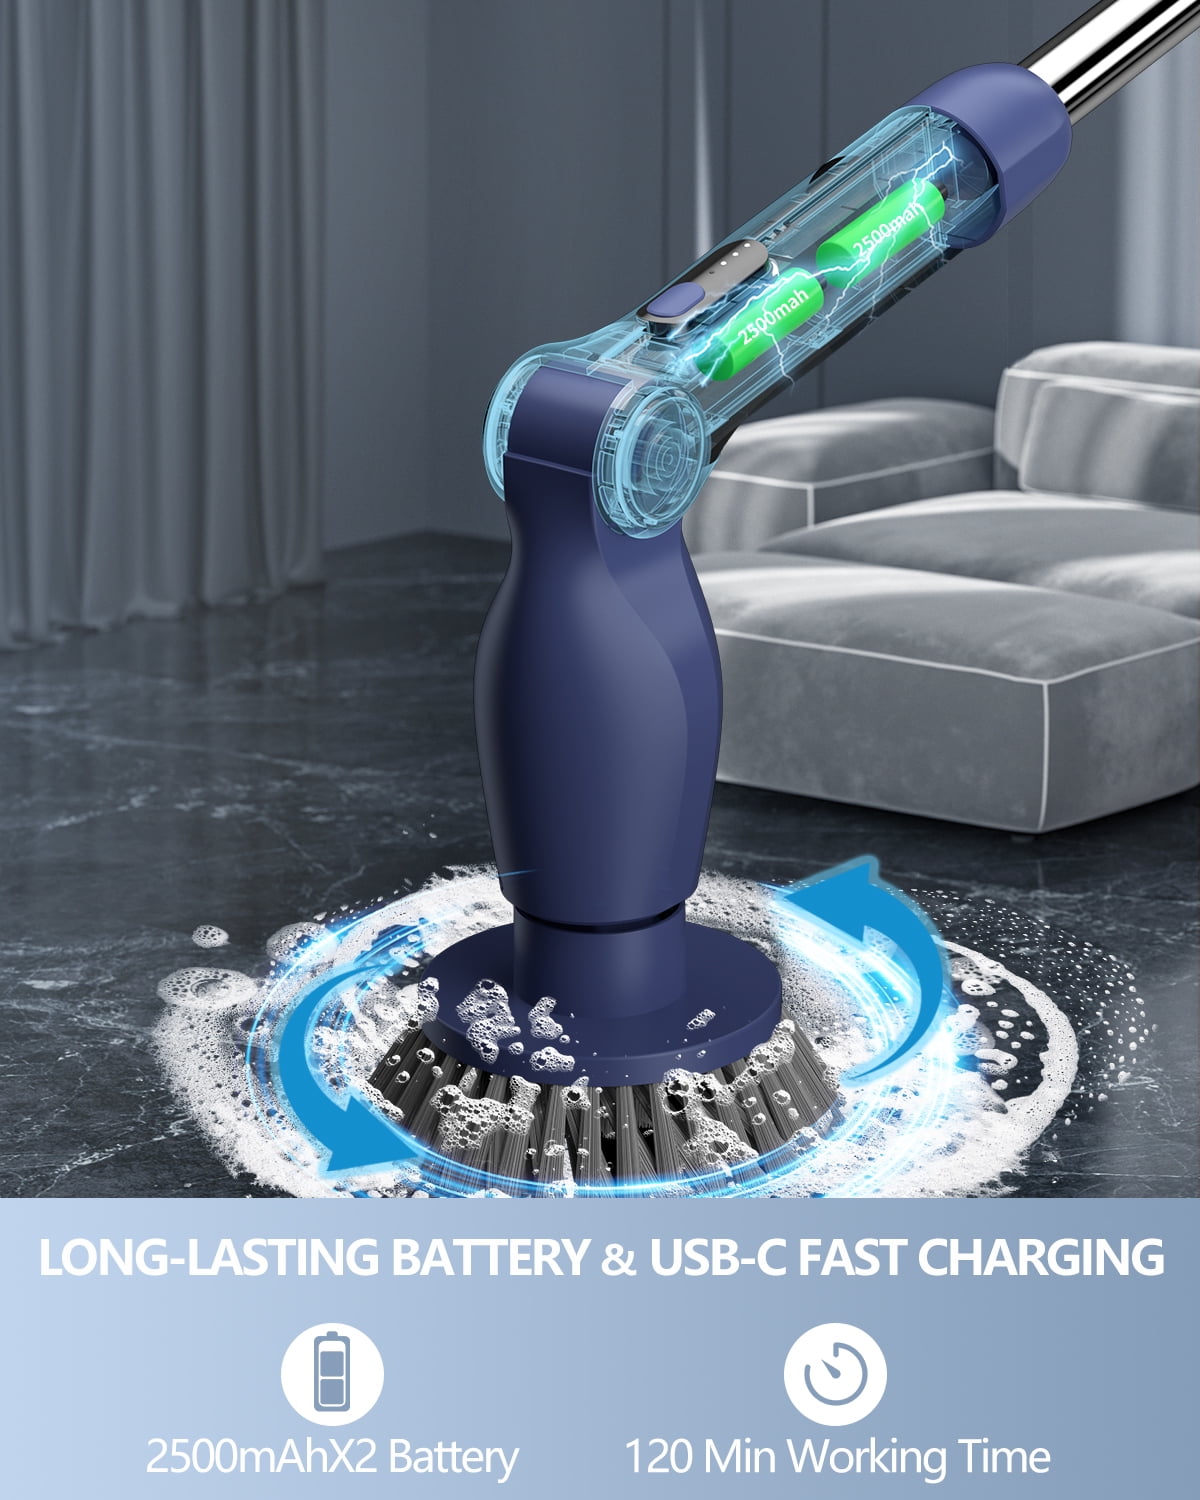 Electric Spin Scrubber, Leebein 2022 New Cordless Cleaning Brush with 8 Replaceable Drill Brush Heads, Tub and Floor Tile 360 Power Scrubber Mop with